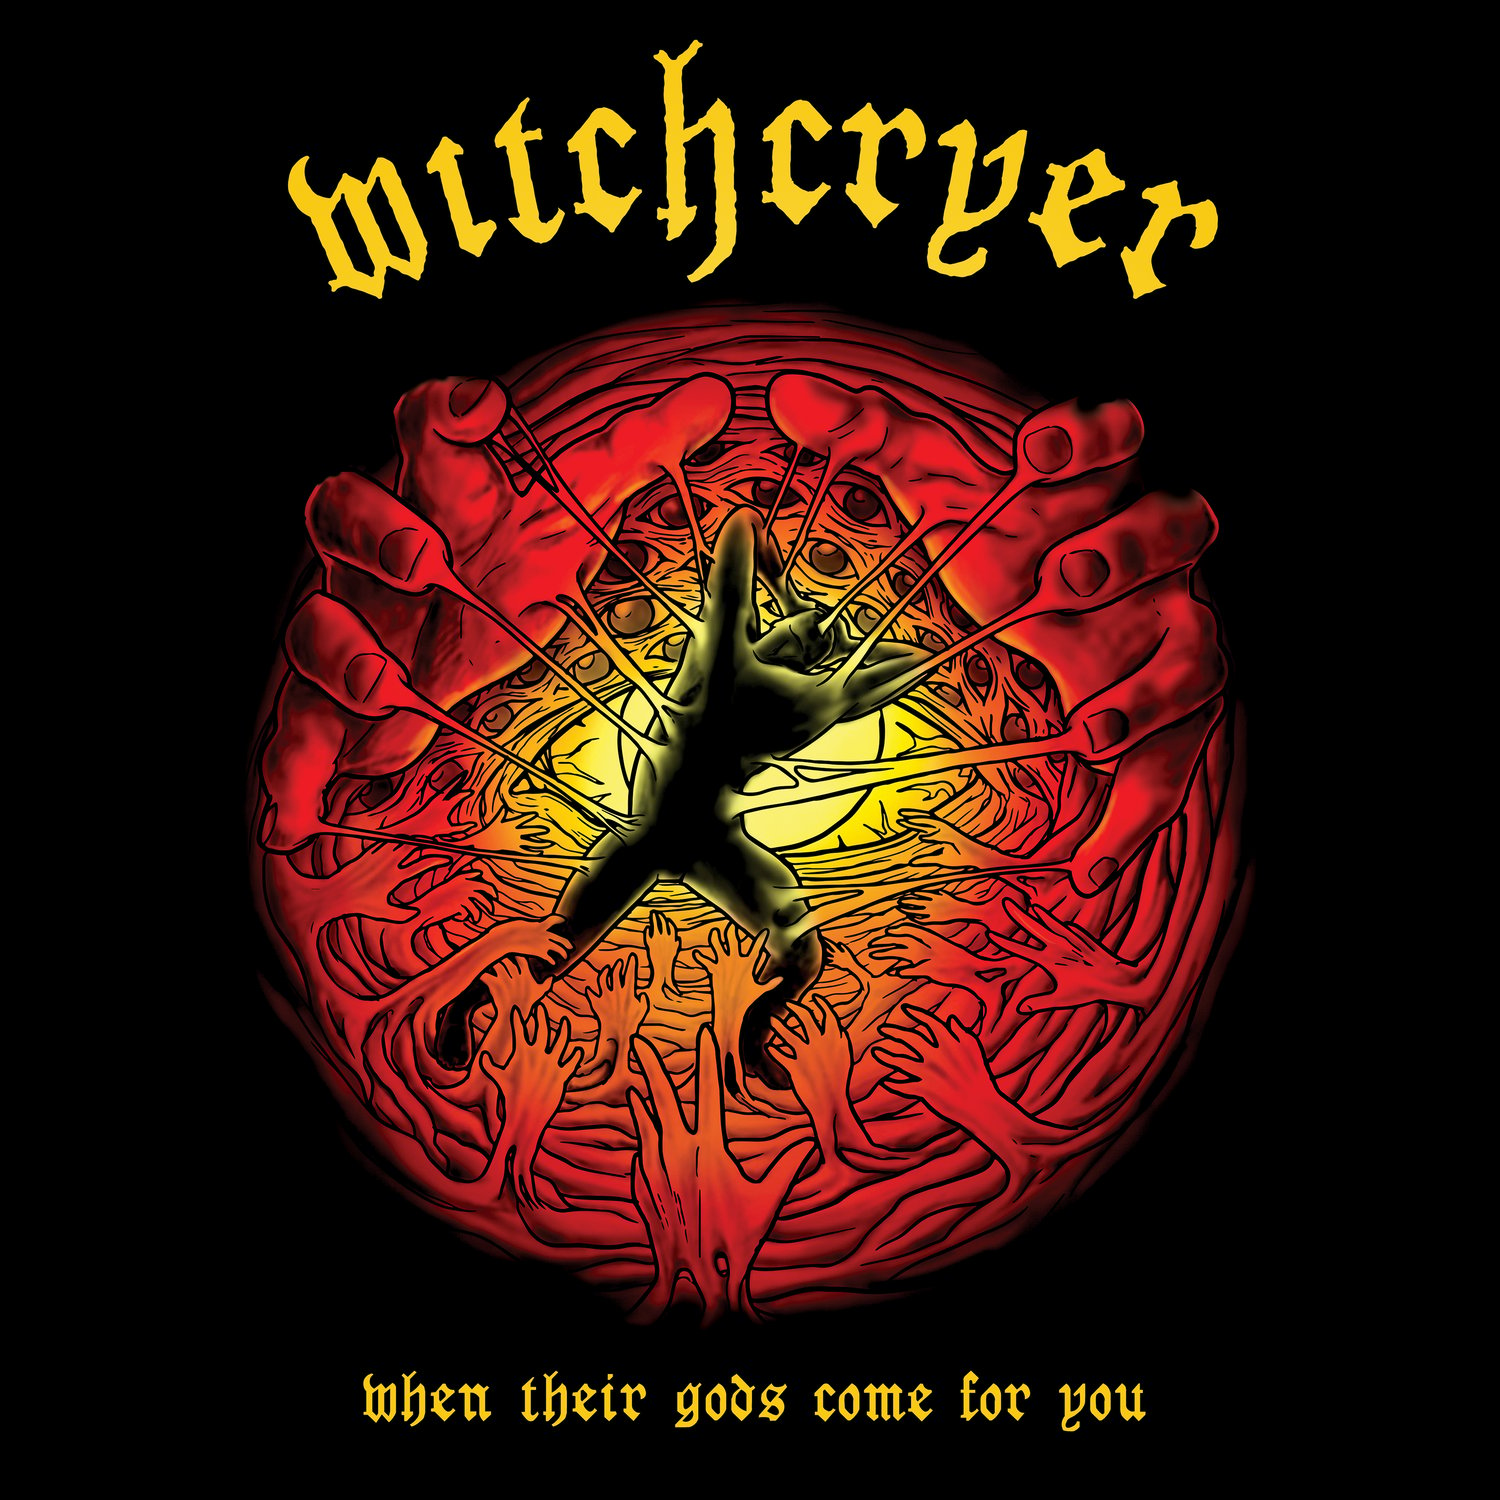 Image of Witchcryer - When Their Gods Come For You Deluxe Vinyl Editions